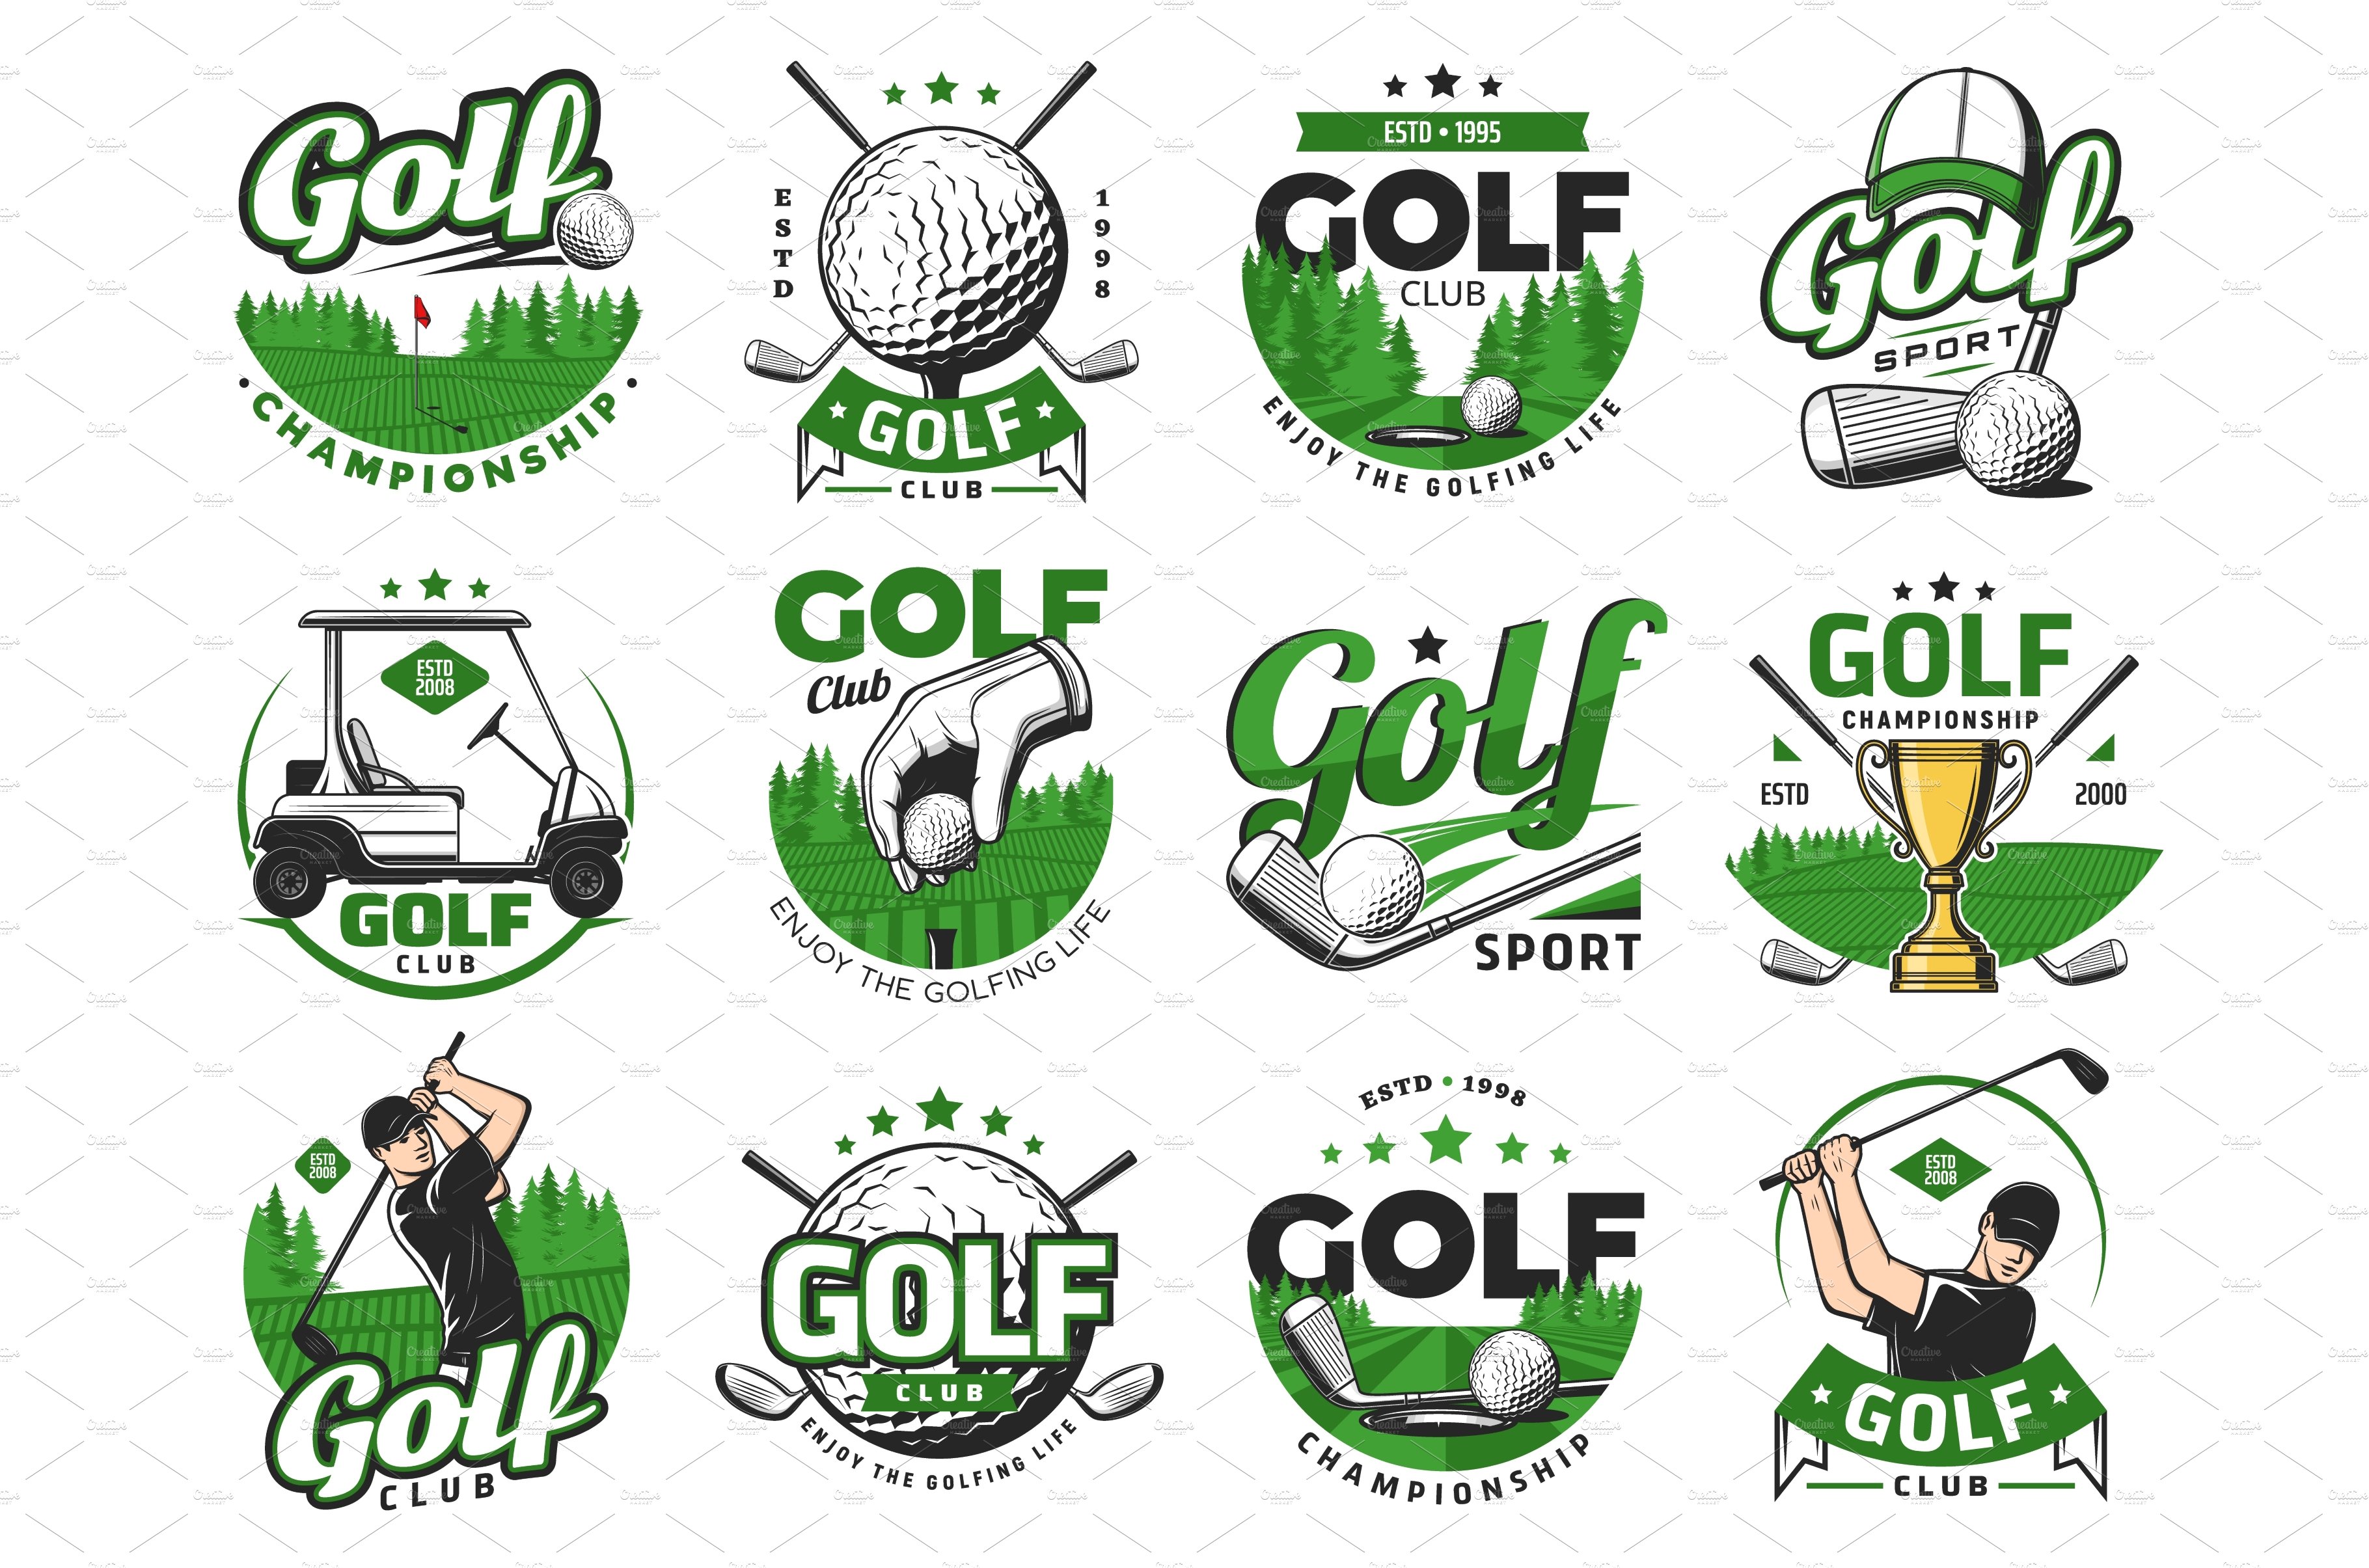 Golf sport icons, golf balls, clubs cover image.